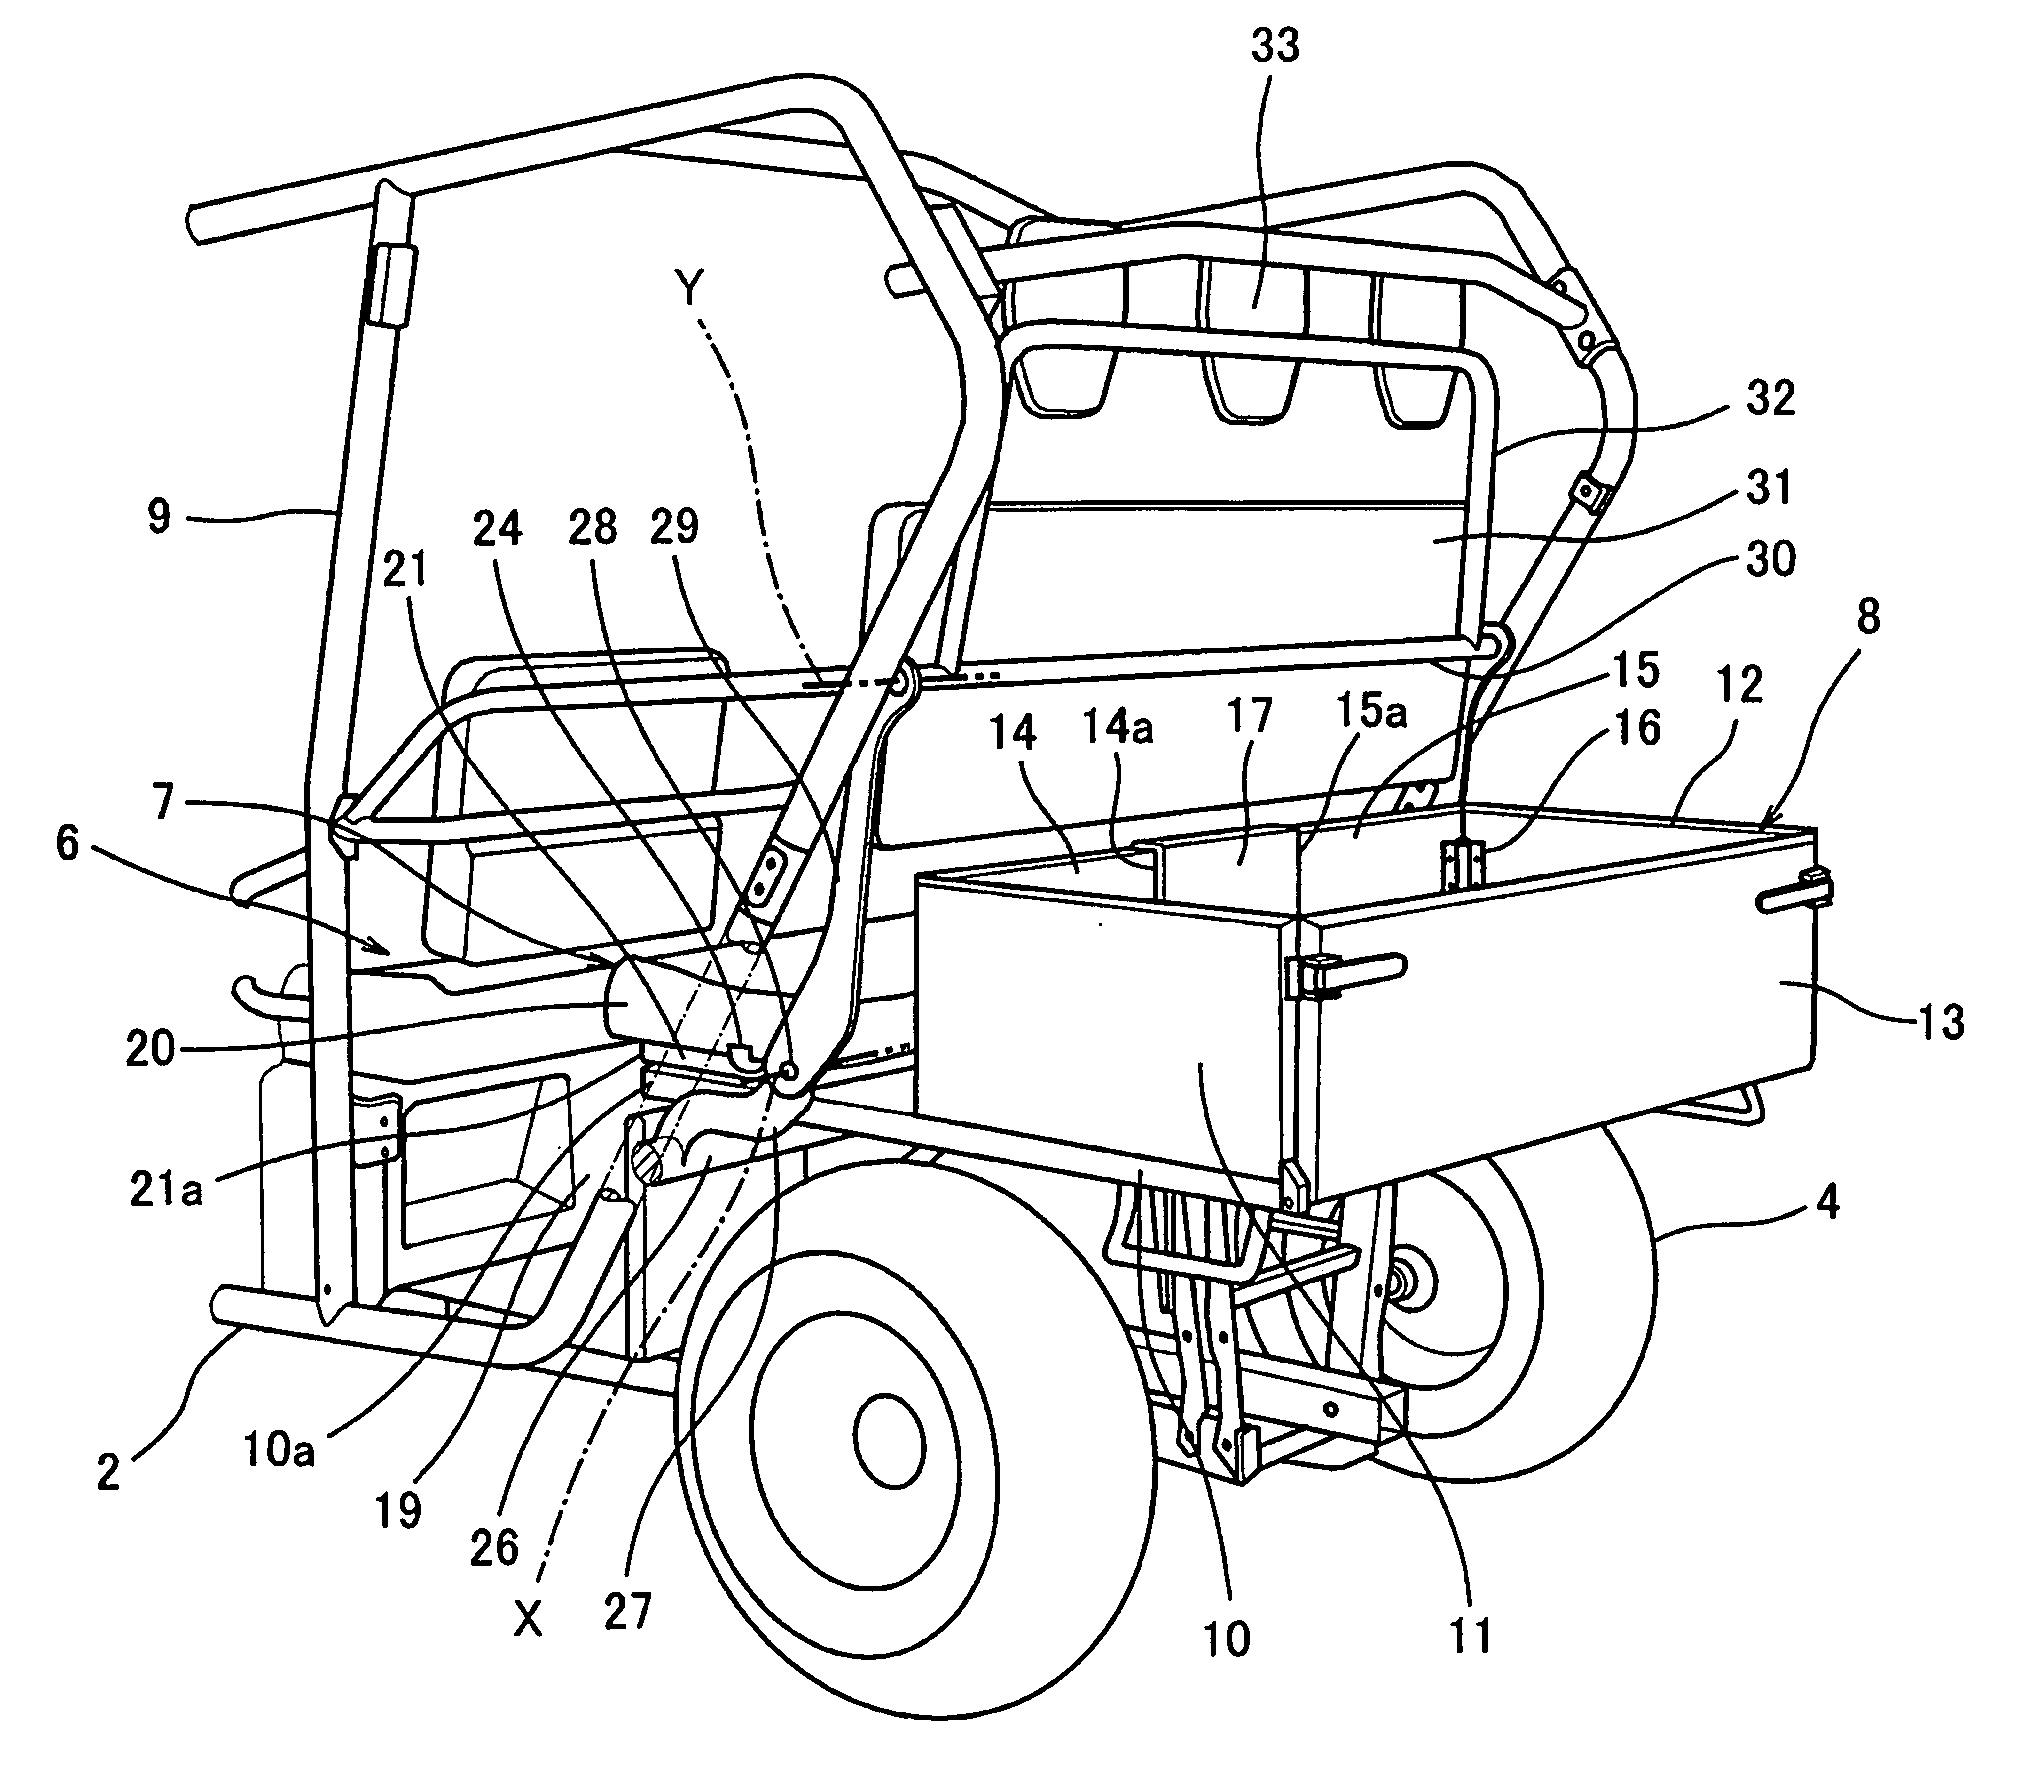 Utility vehicle equipped with extendable cargo bed